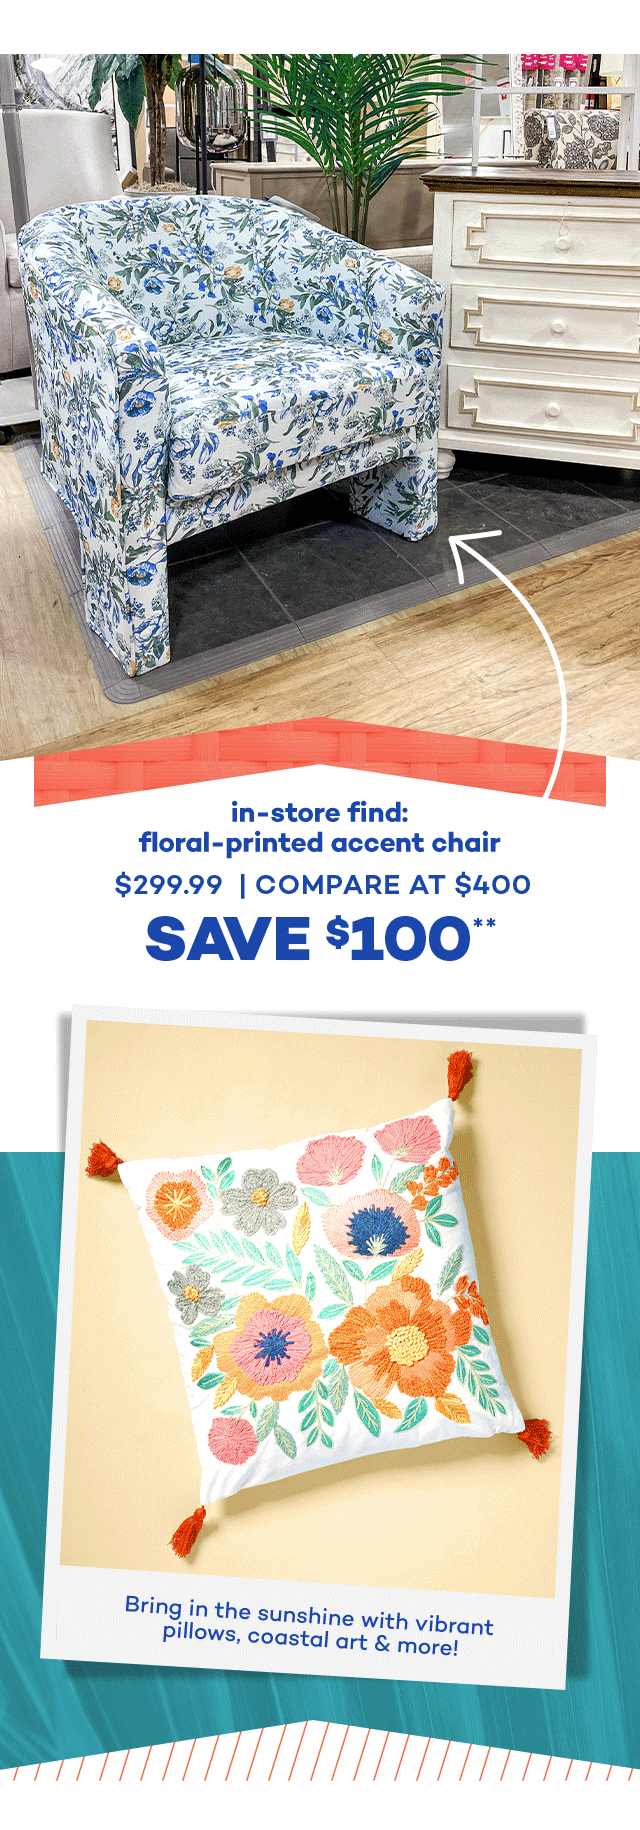 in-store find: floral-printed accent chair $299.99 compare at $400 save $100.** Bring in the sunshine with vibrant pillows, coastal art and more!